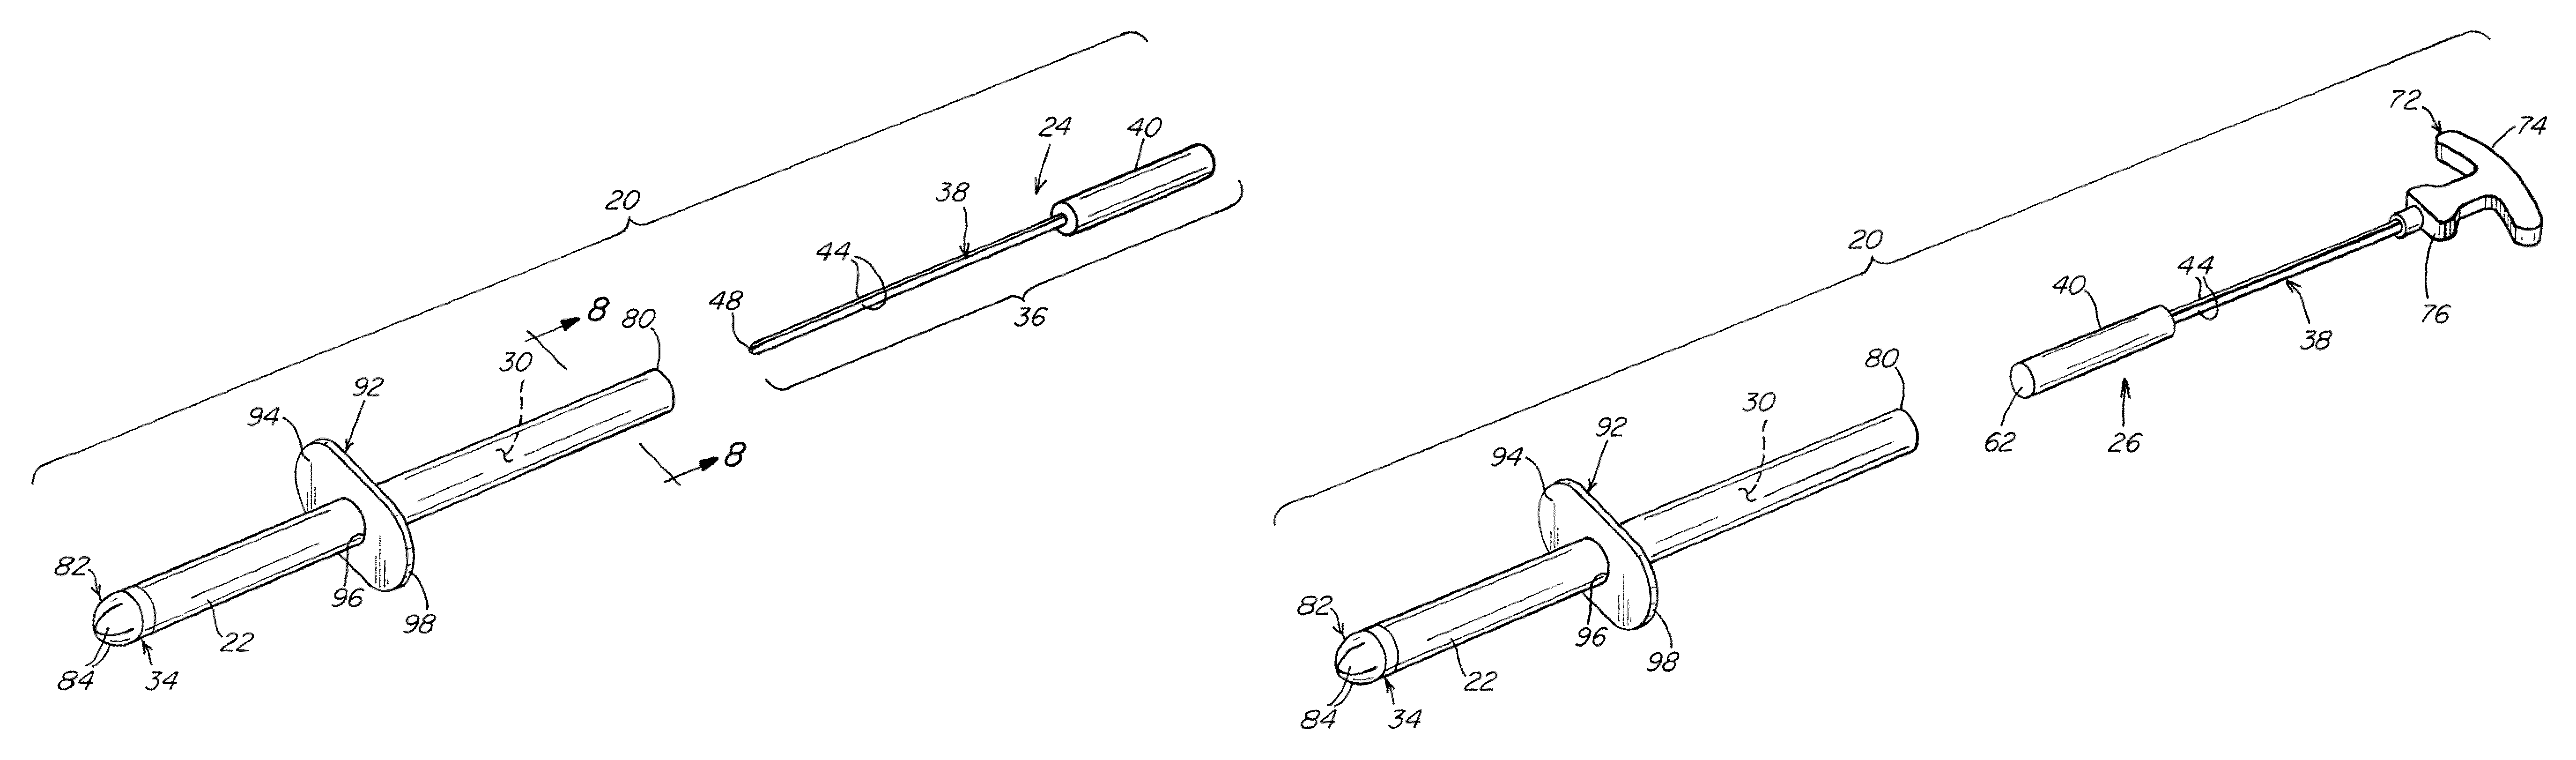 Method and apparatus for delivering a prosthetic fabric into a patient